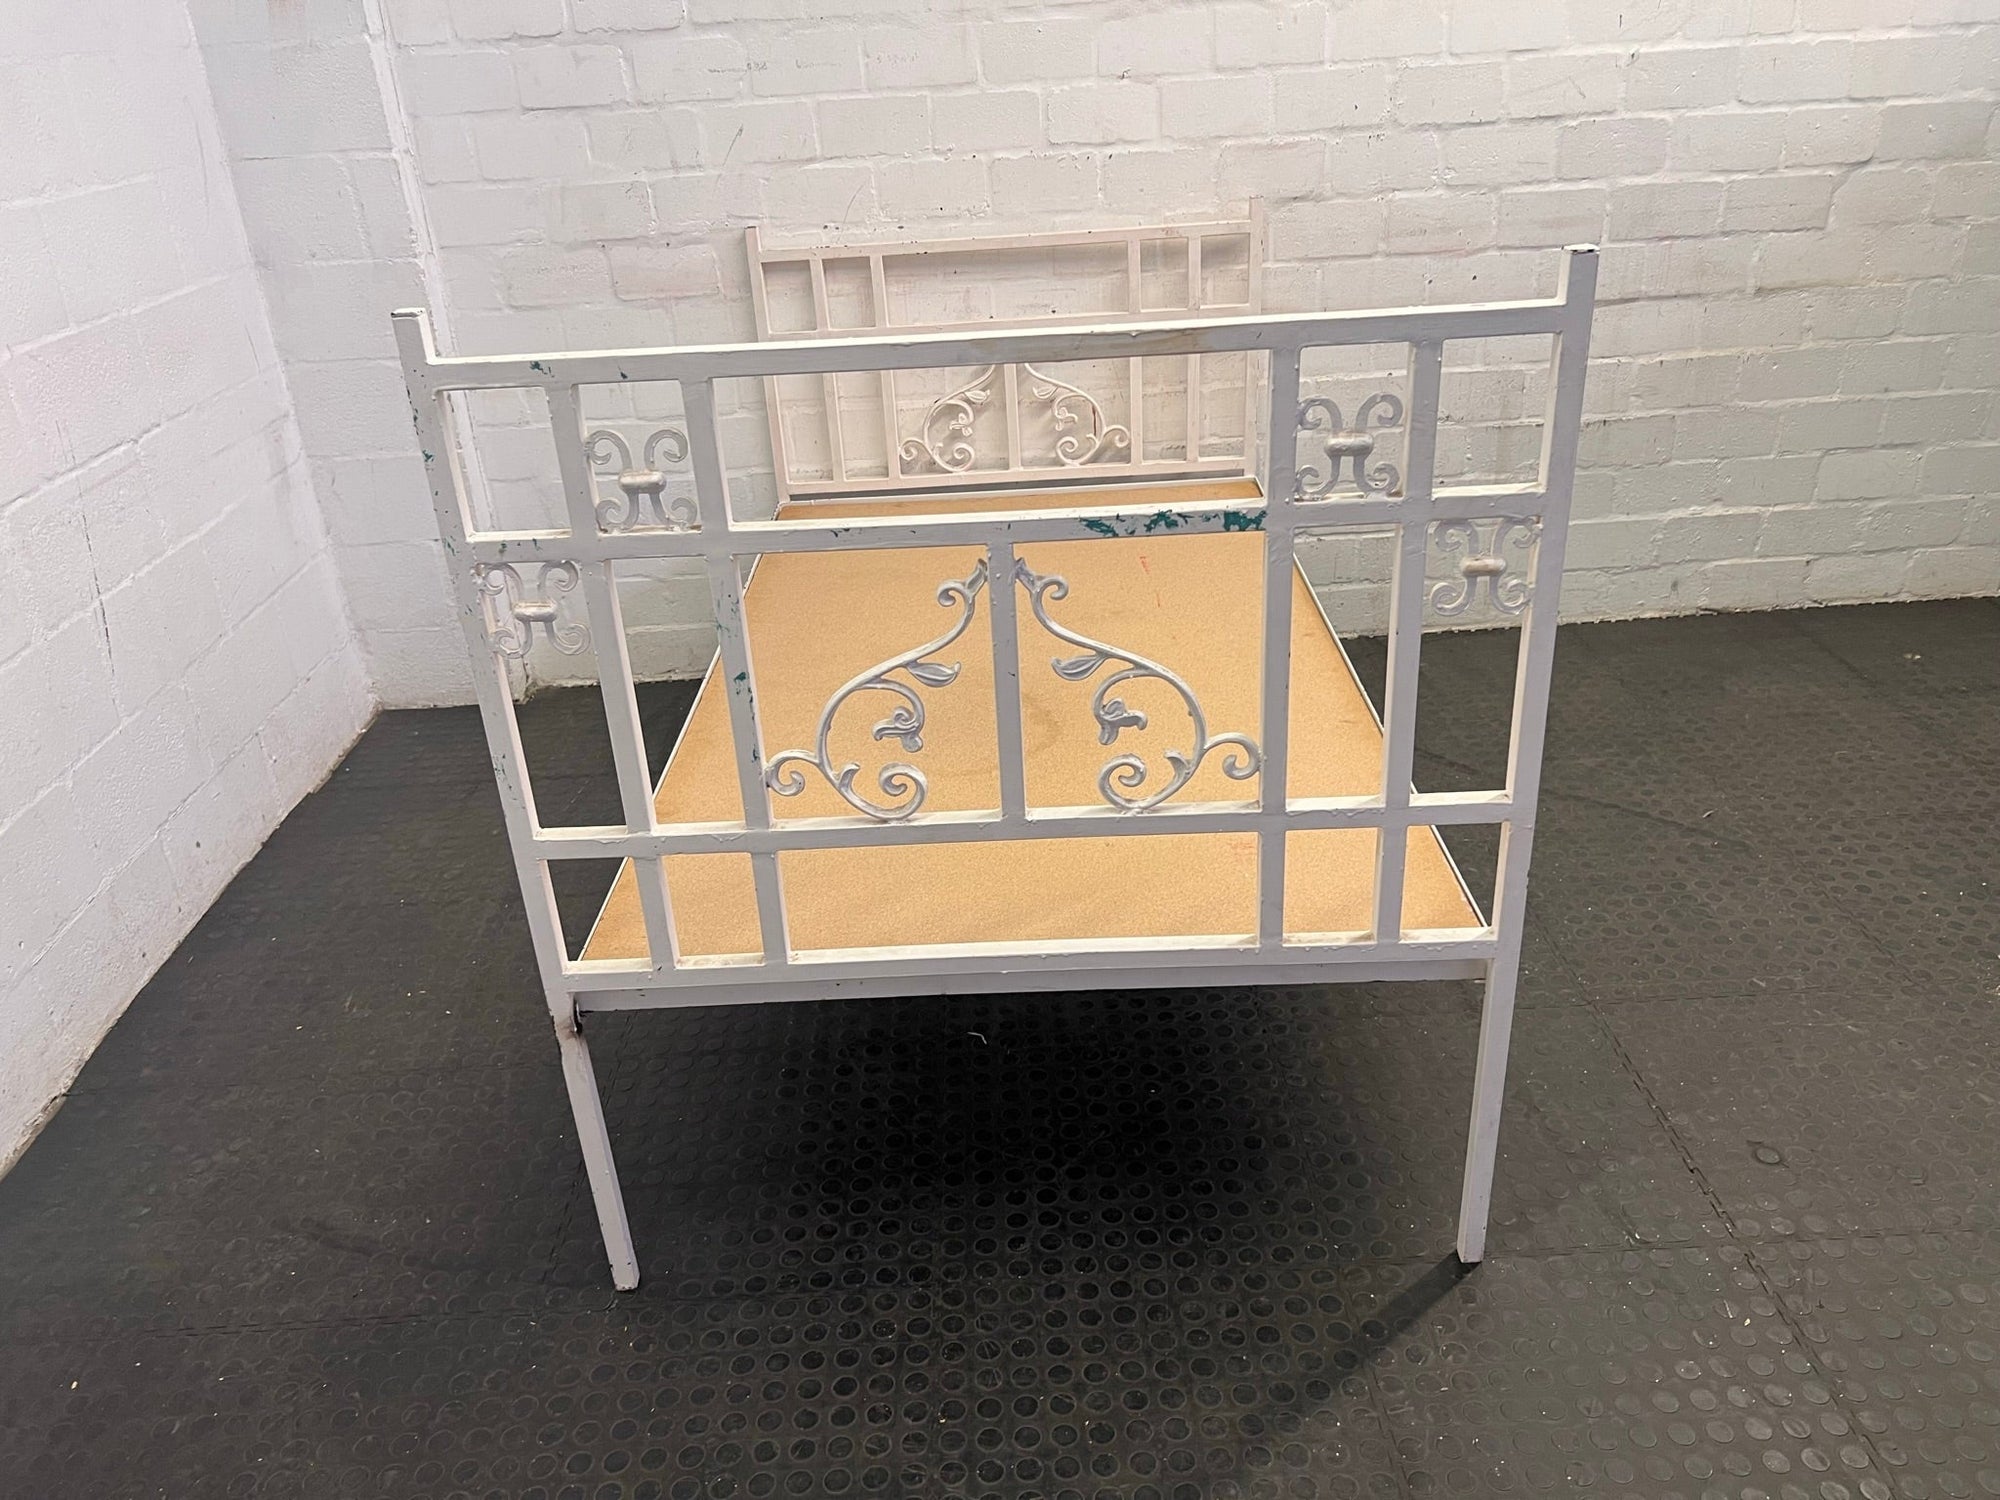 White 3/4 Bed Frame with Wooden Chip Board - REDUCED